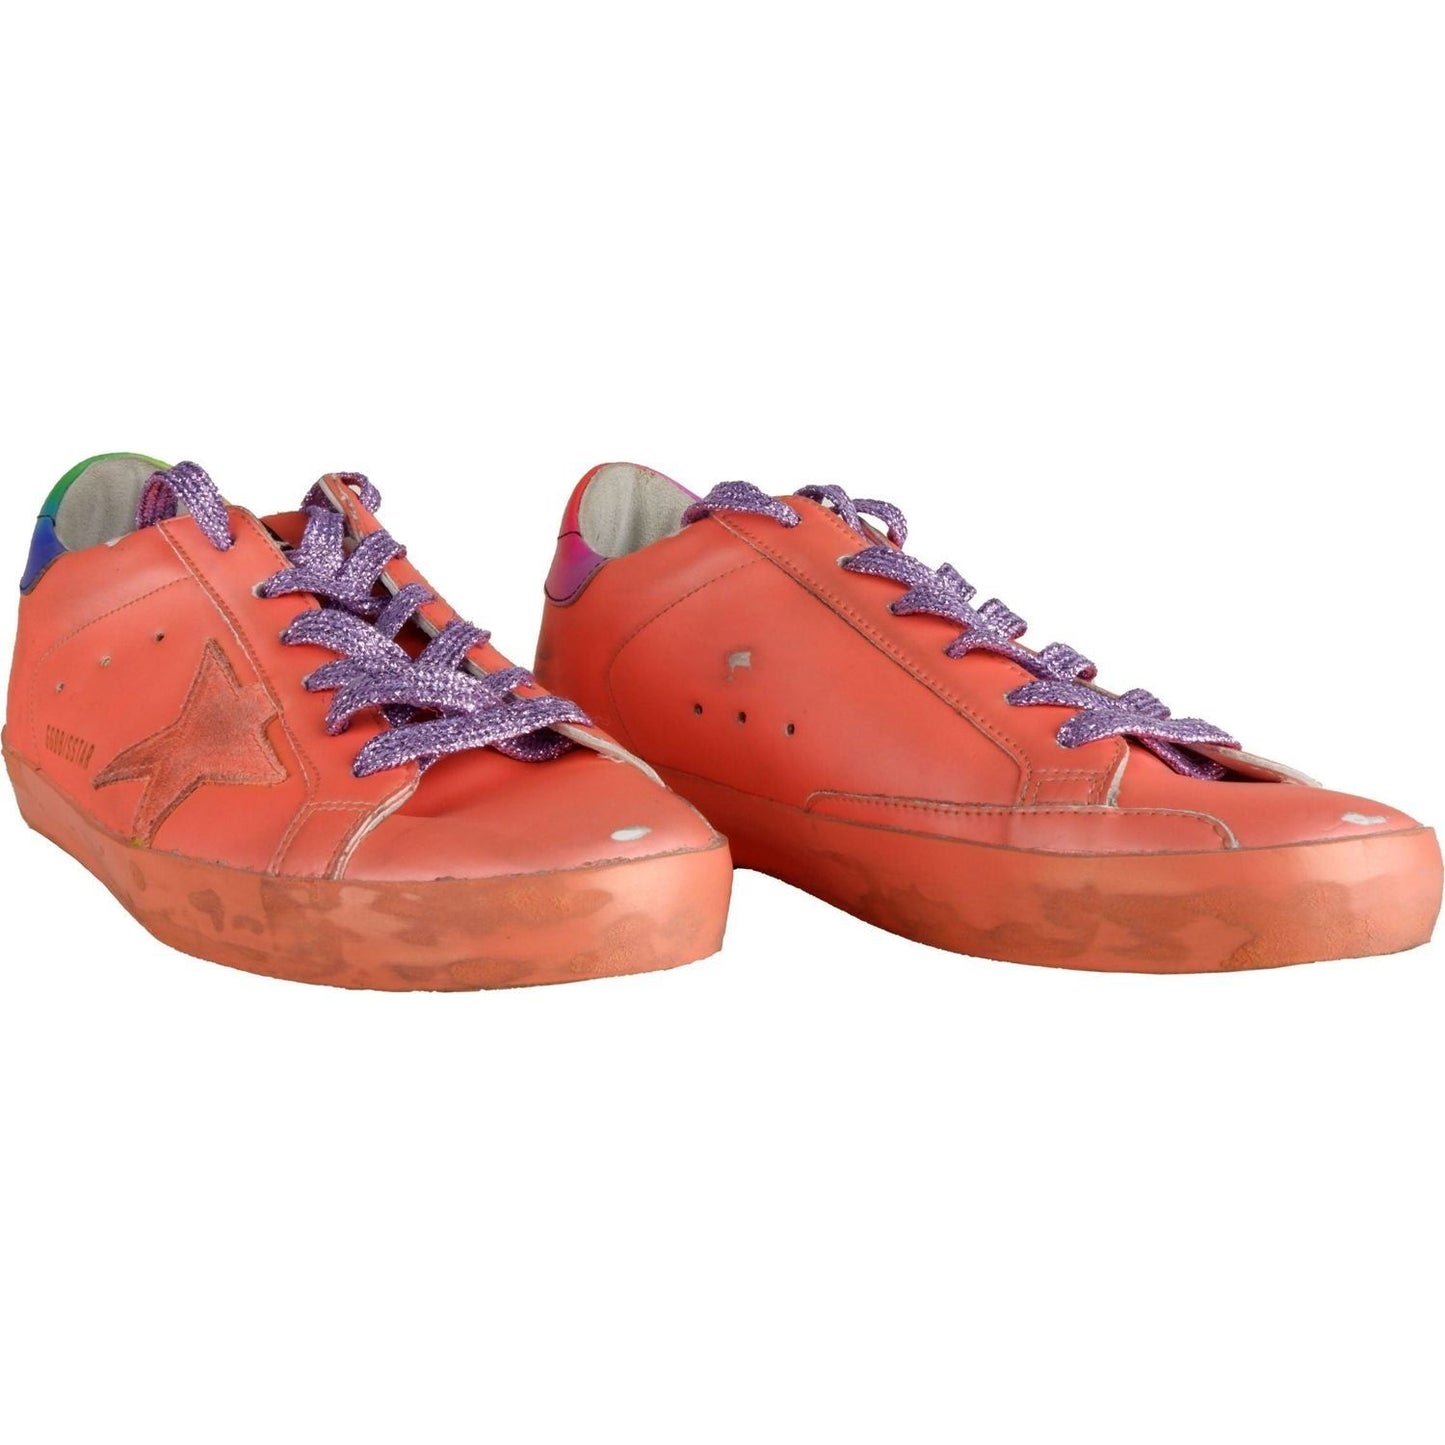 Golden Goose Orange Glitter Lace Sneakers with Suede Accents orange-leather-sneaker product-7187-589265225-scaled-d5efe9b3-e78.jpg